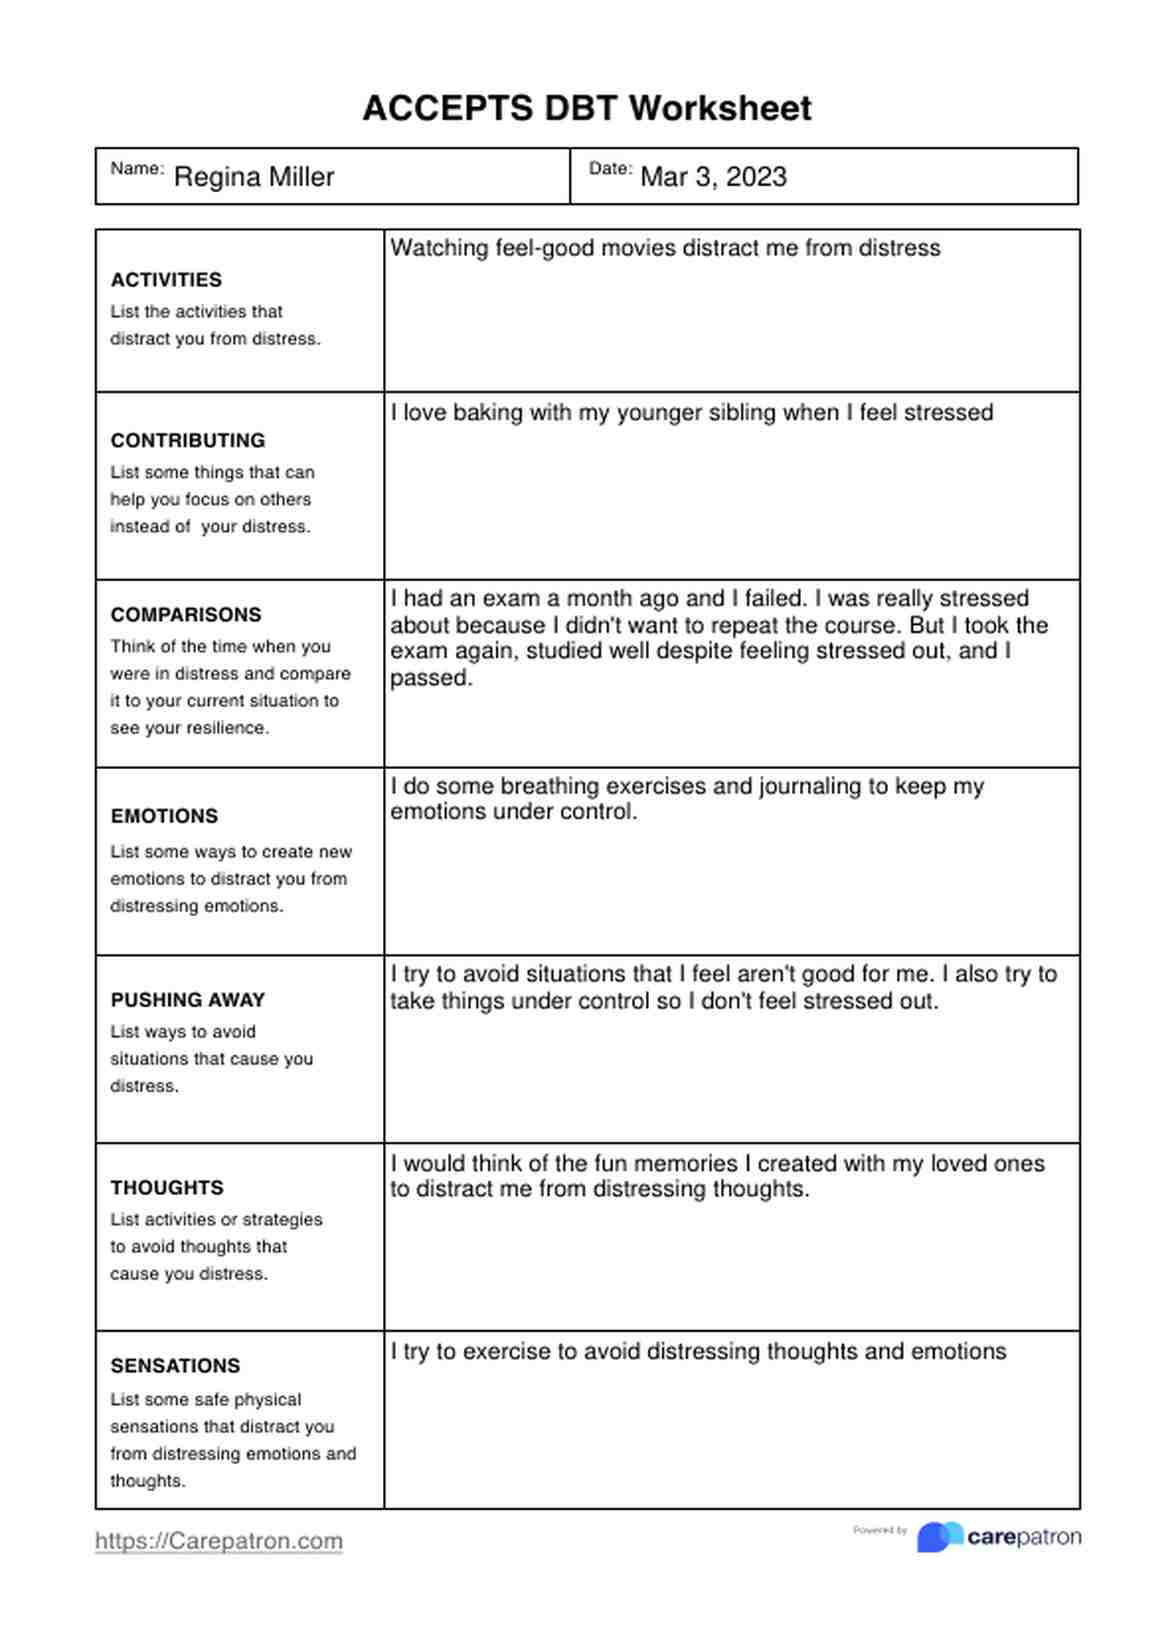 ACCEPTS DBT Worksheets PDF Example